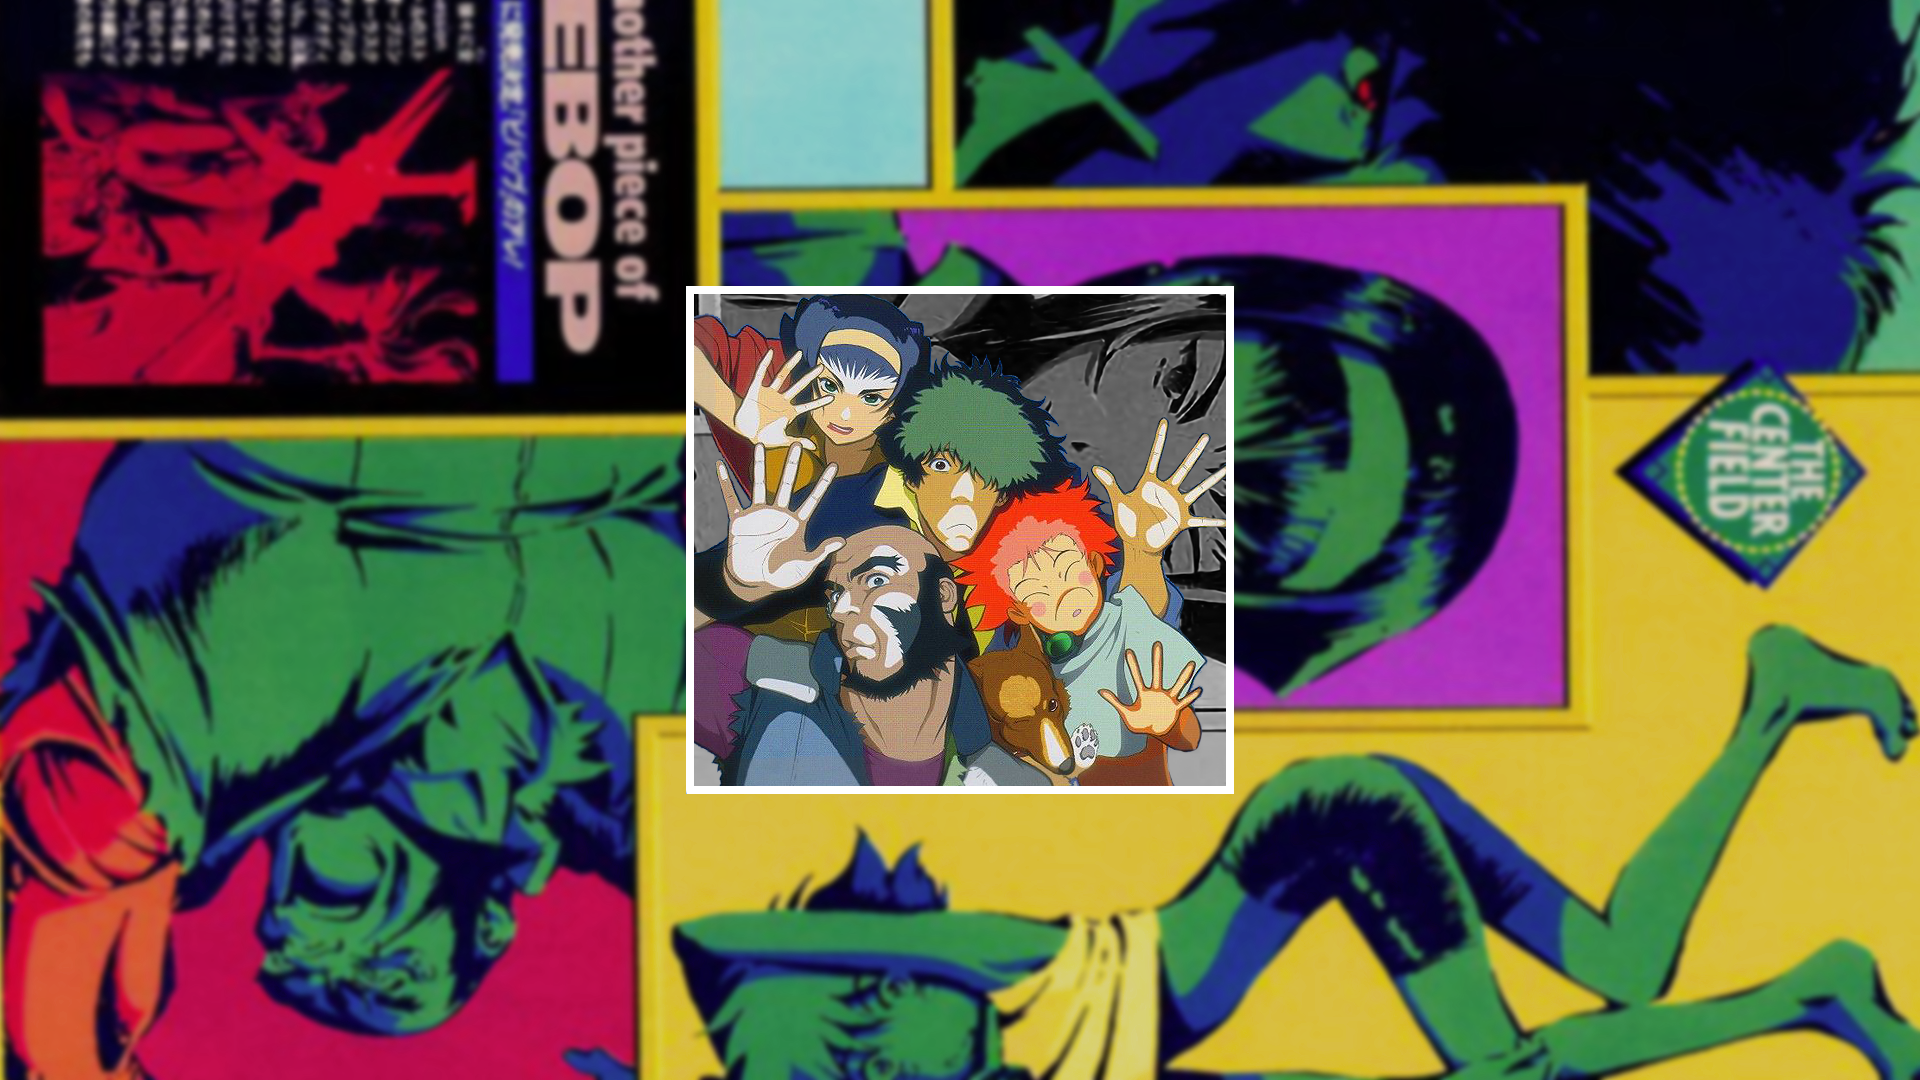 Cowboy Bebop Spike Spiegel Faye Valentine Picture In Picture Piture In Picture 1920x1080